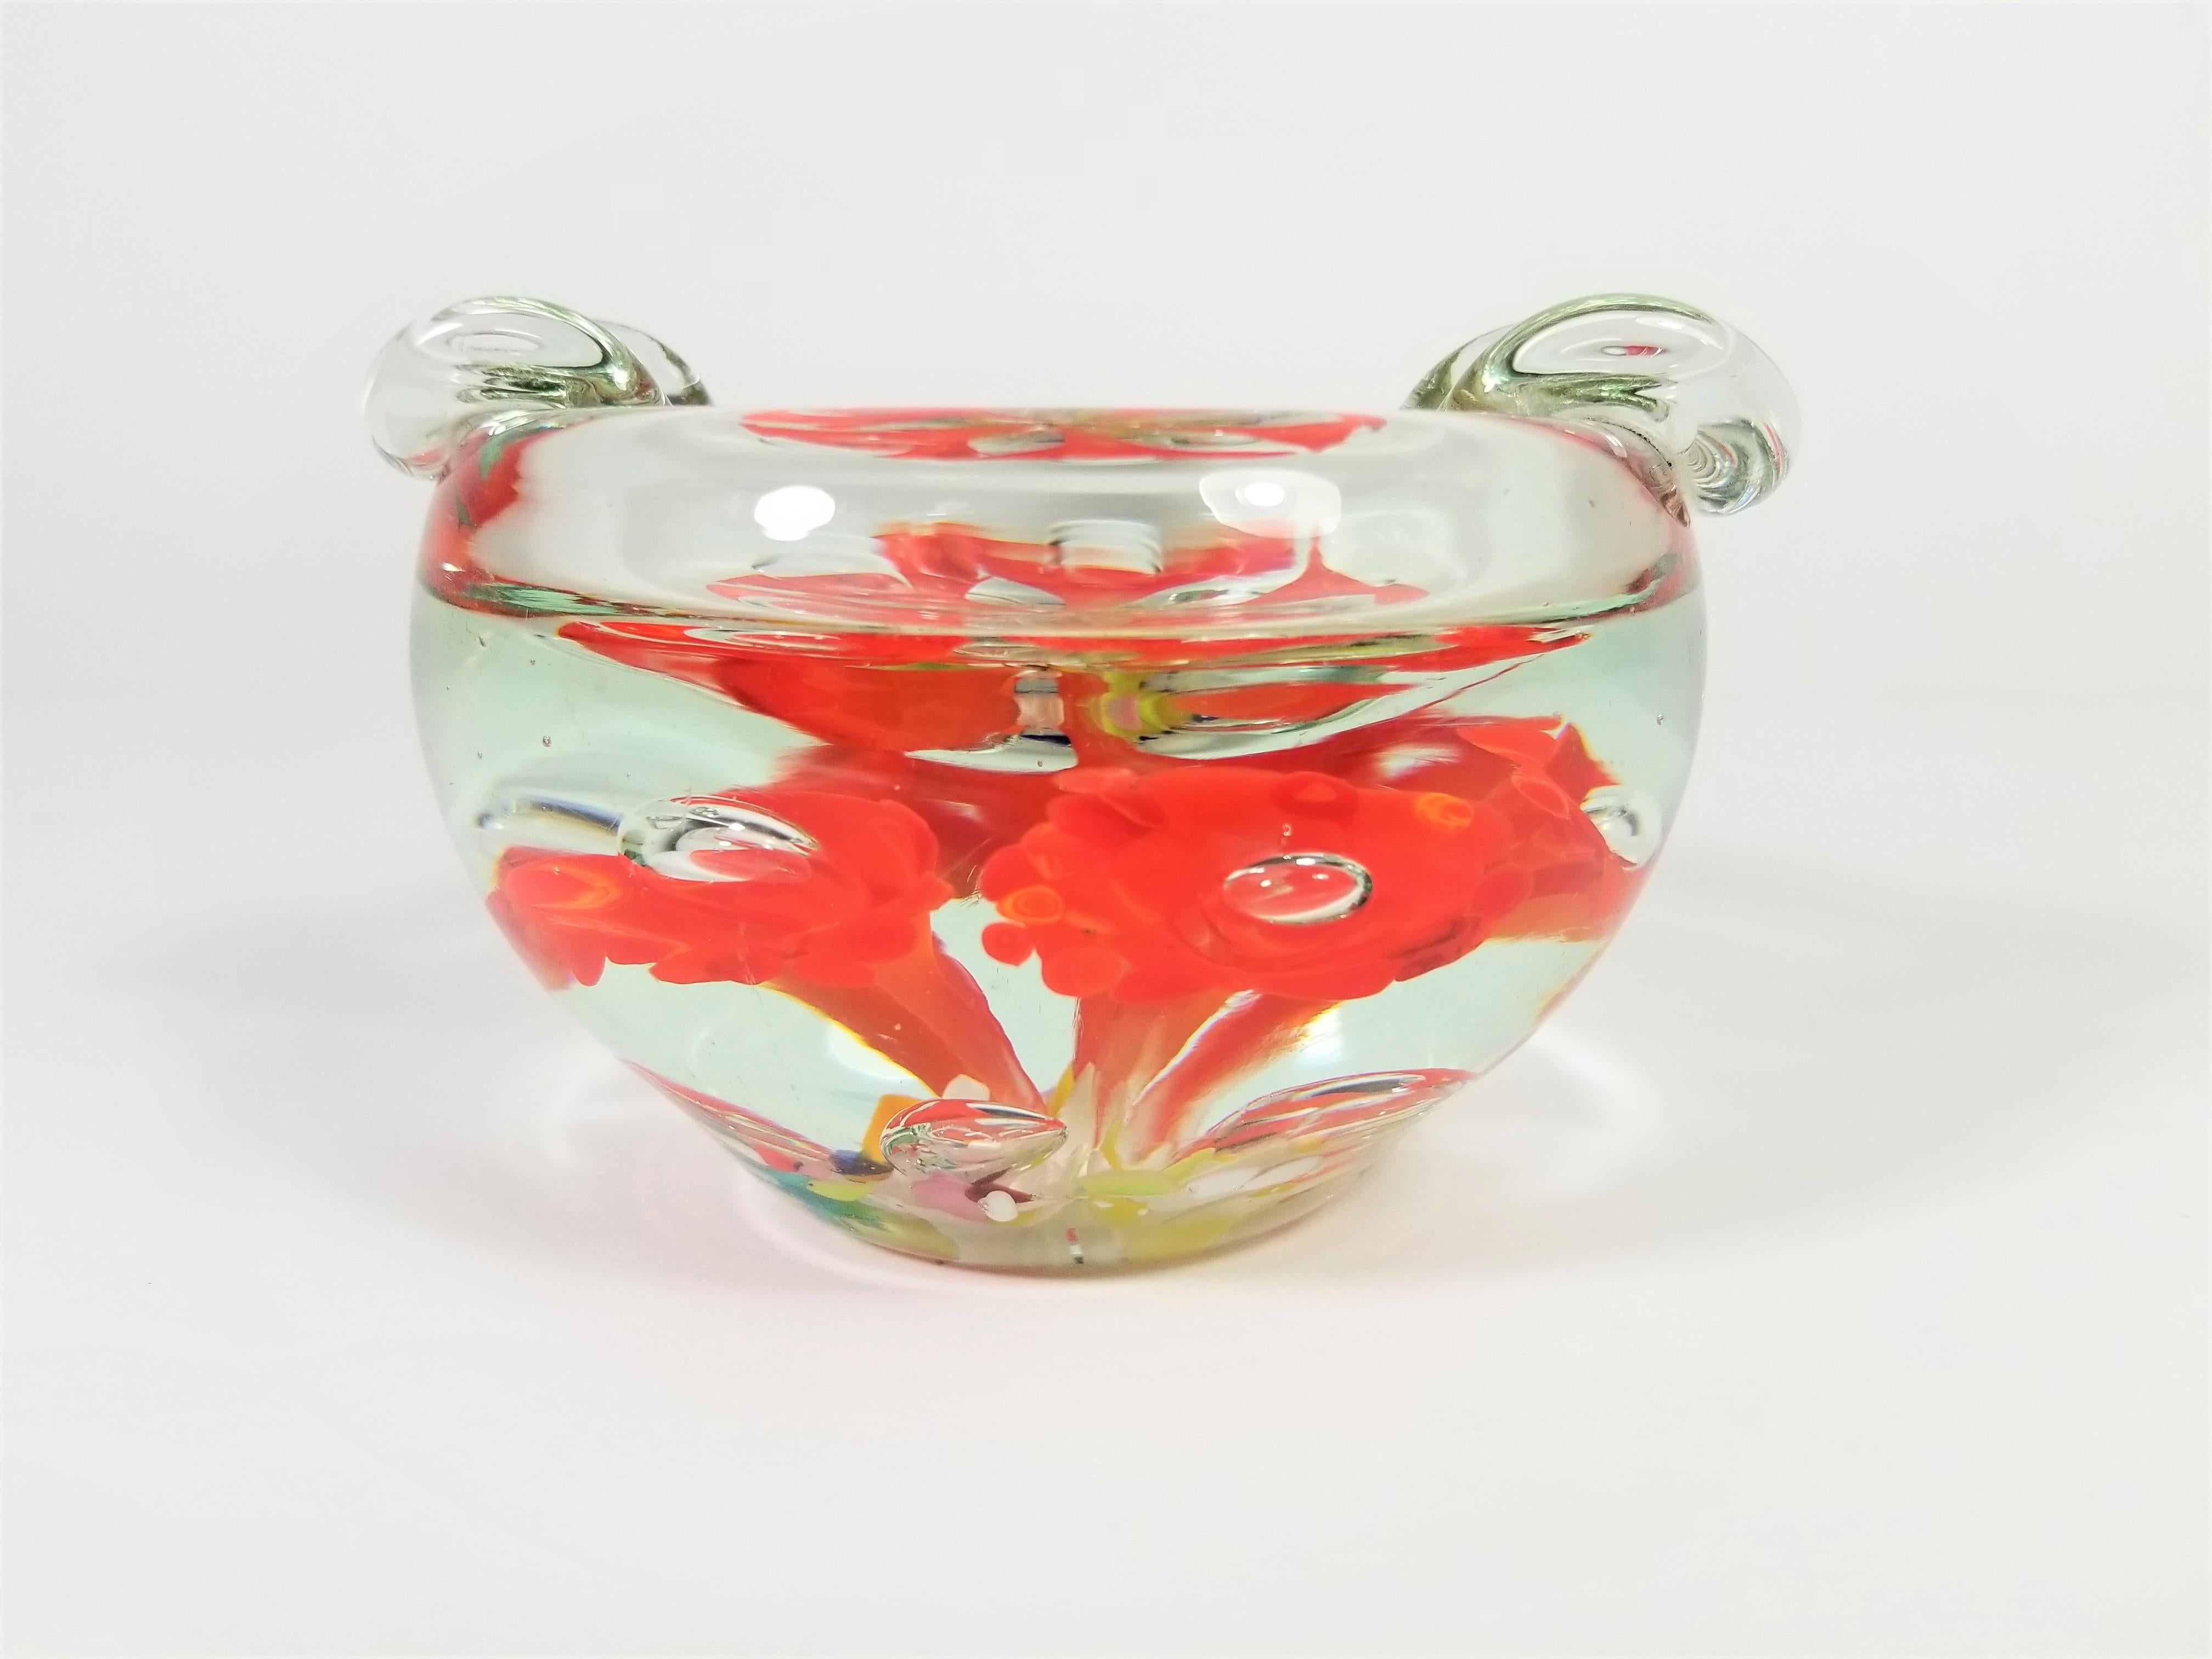 1960s midcentury Murano ashtray. Art glass multicolored blown glass.
Solid piece with substantial weight. Psychedelic flower design.
Excellent condition.